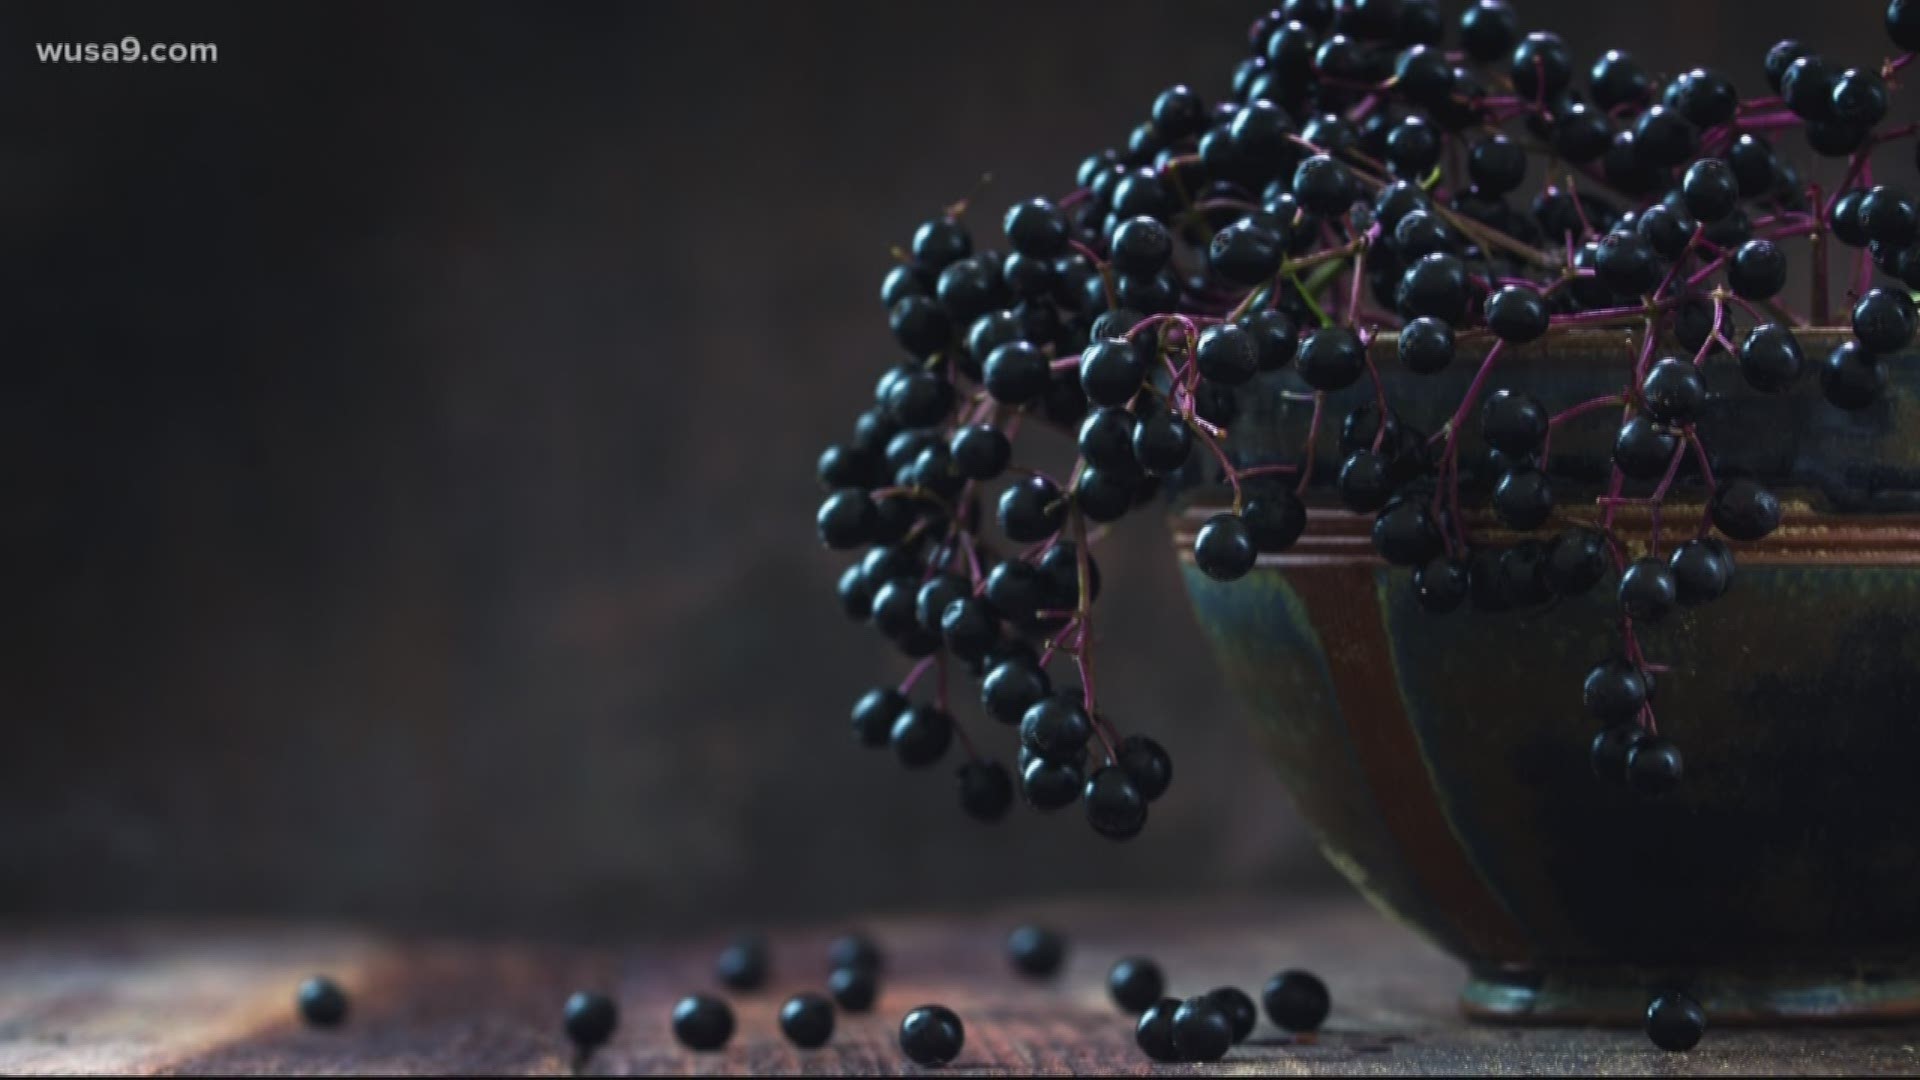 Is taking elderberry supplements during the pandemic dangerous for my health? Find out on this verify.